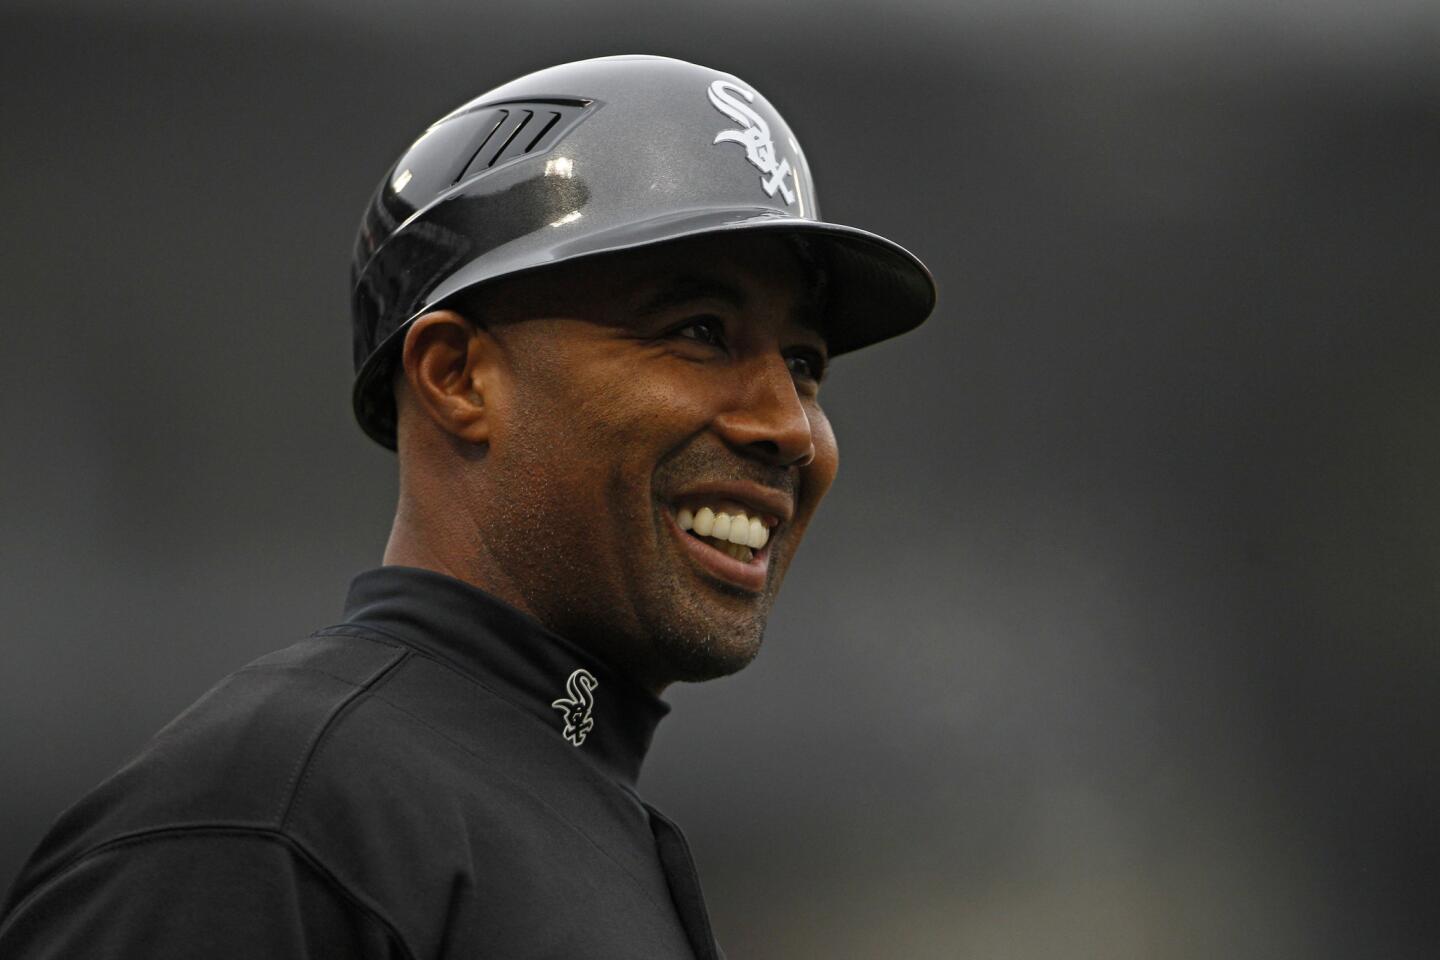 White Sox first base coach Harold Baines during a 2011 game against the Rays at U.S. Cellular Field.